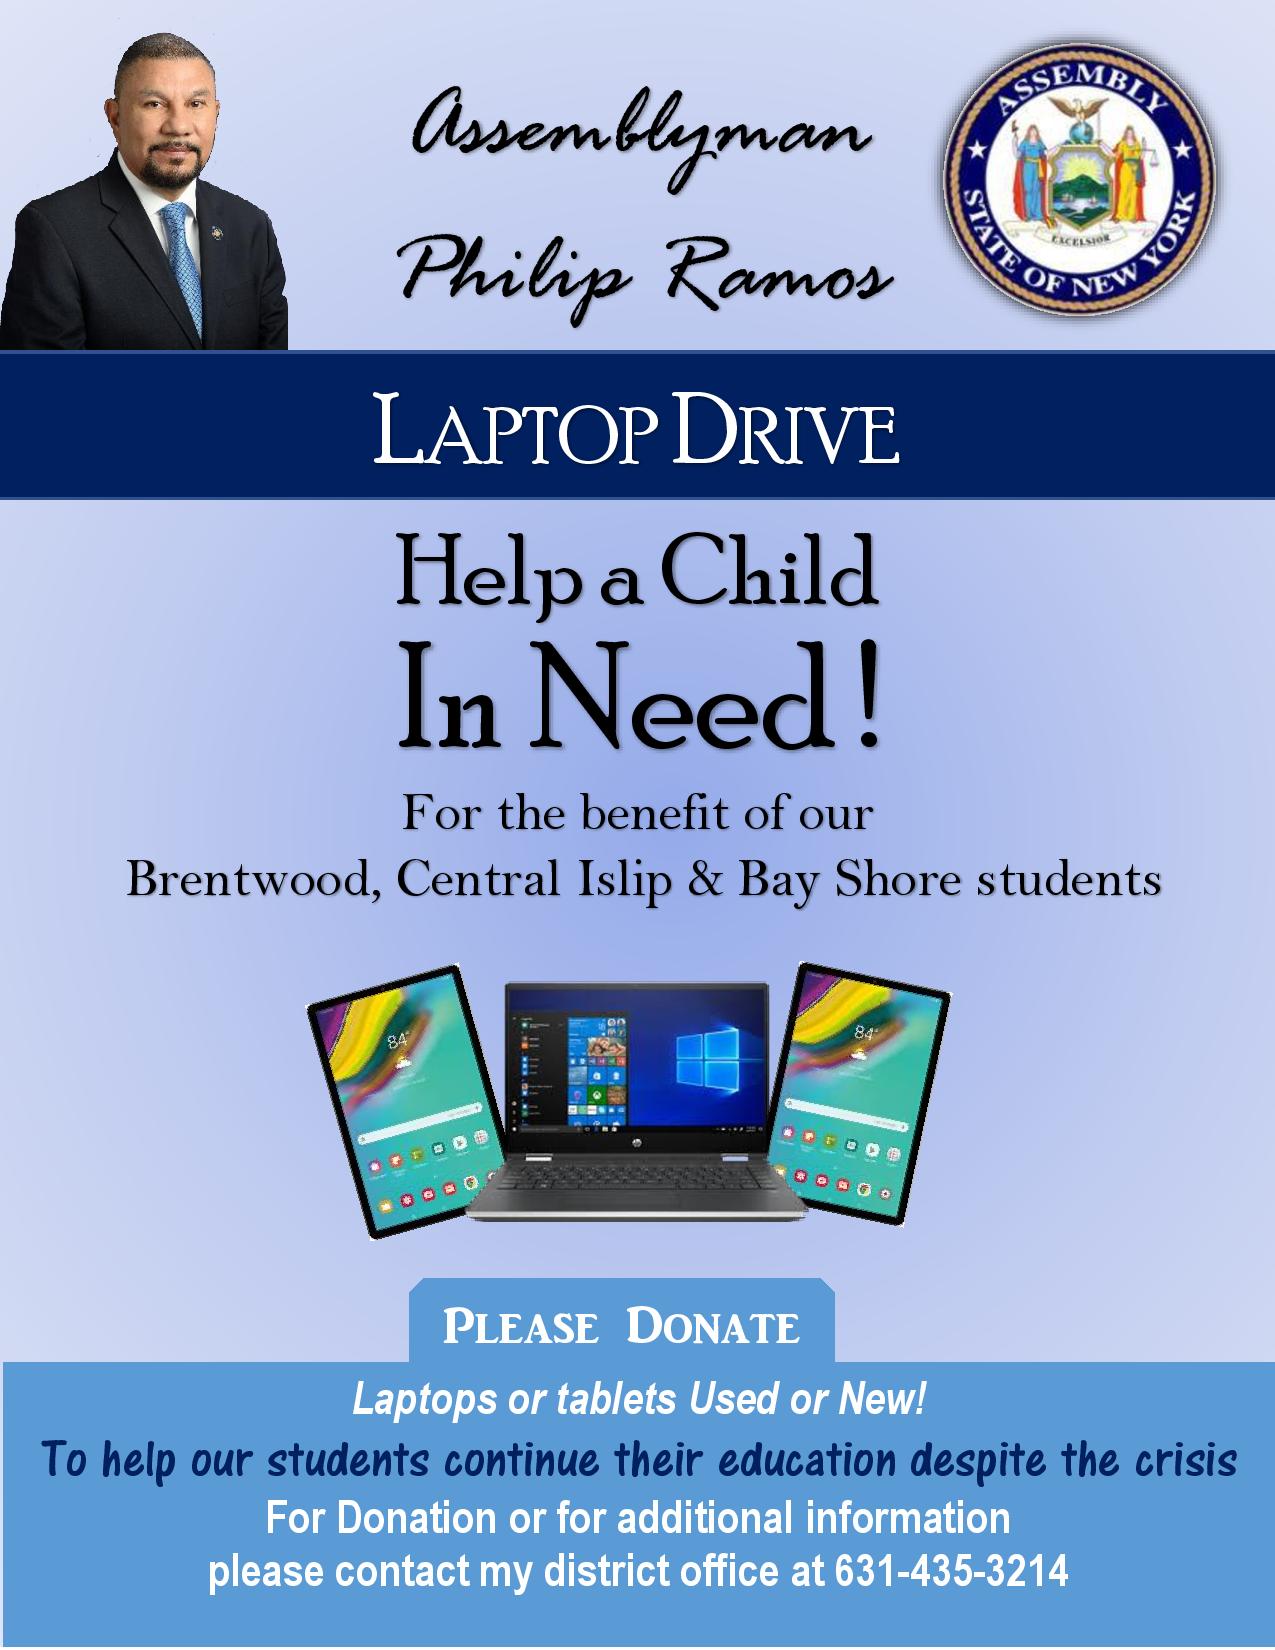 An image asking for the donation of laptops and tablets for students